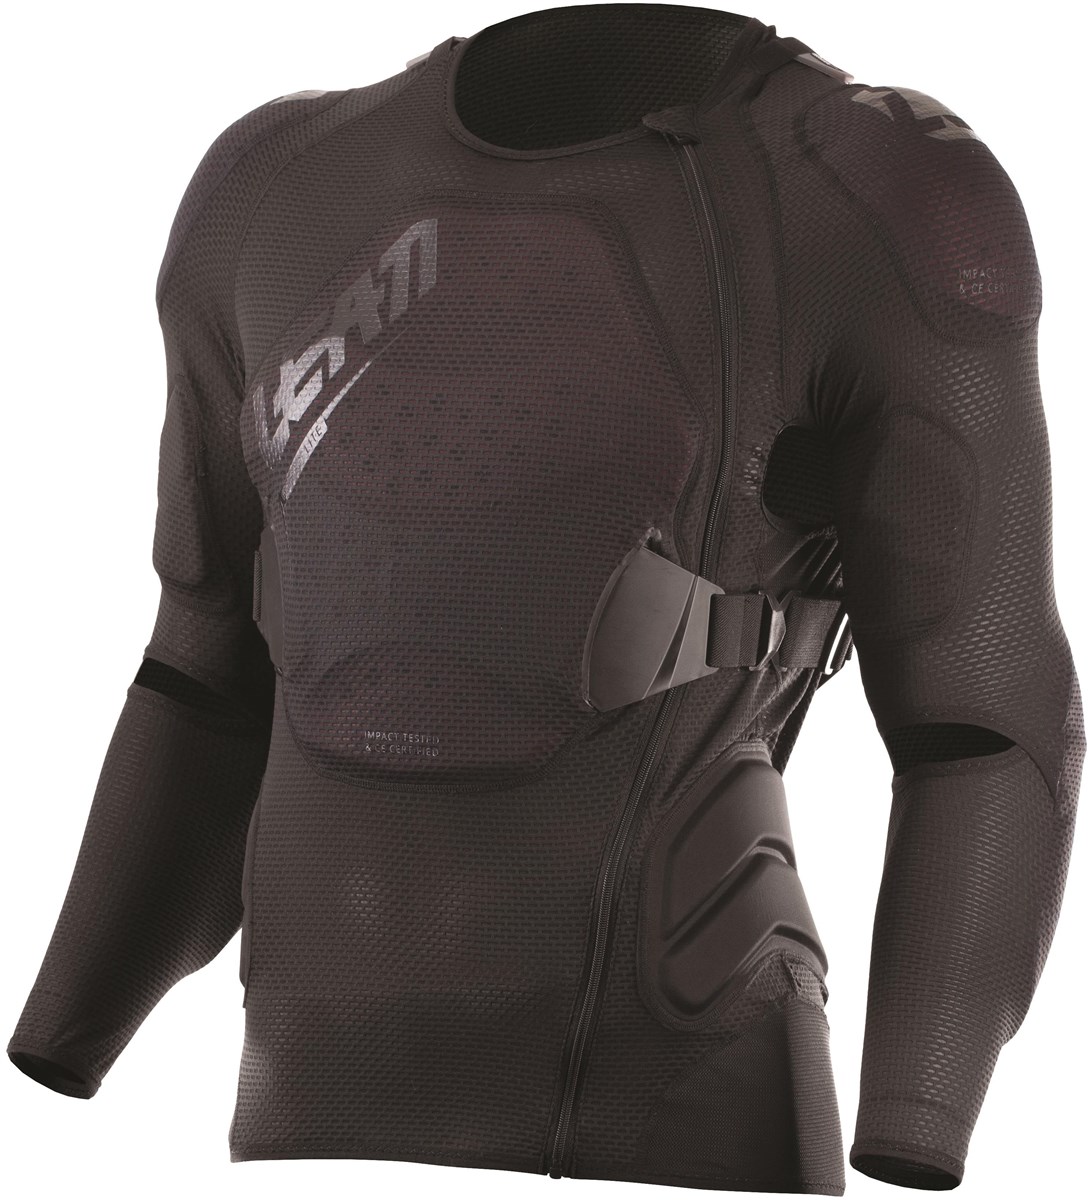 Leatt 3DF AirFit Lite Body Protector product image